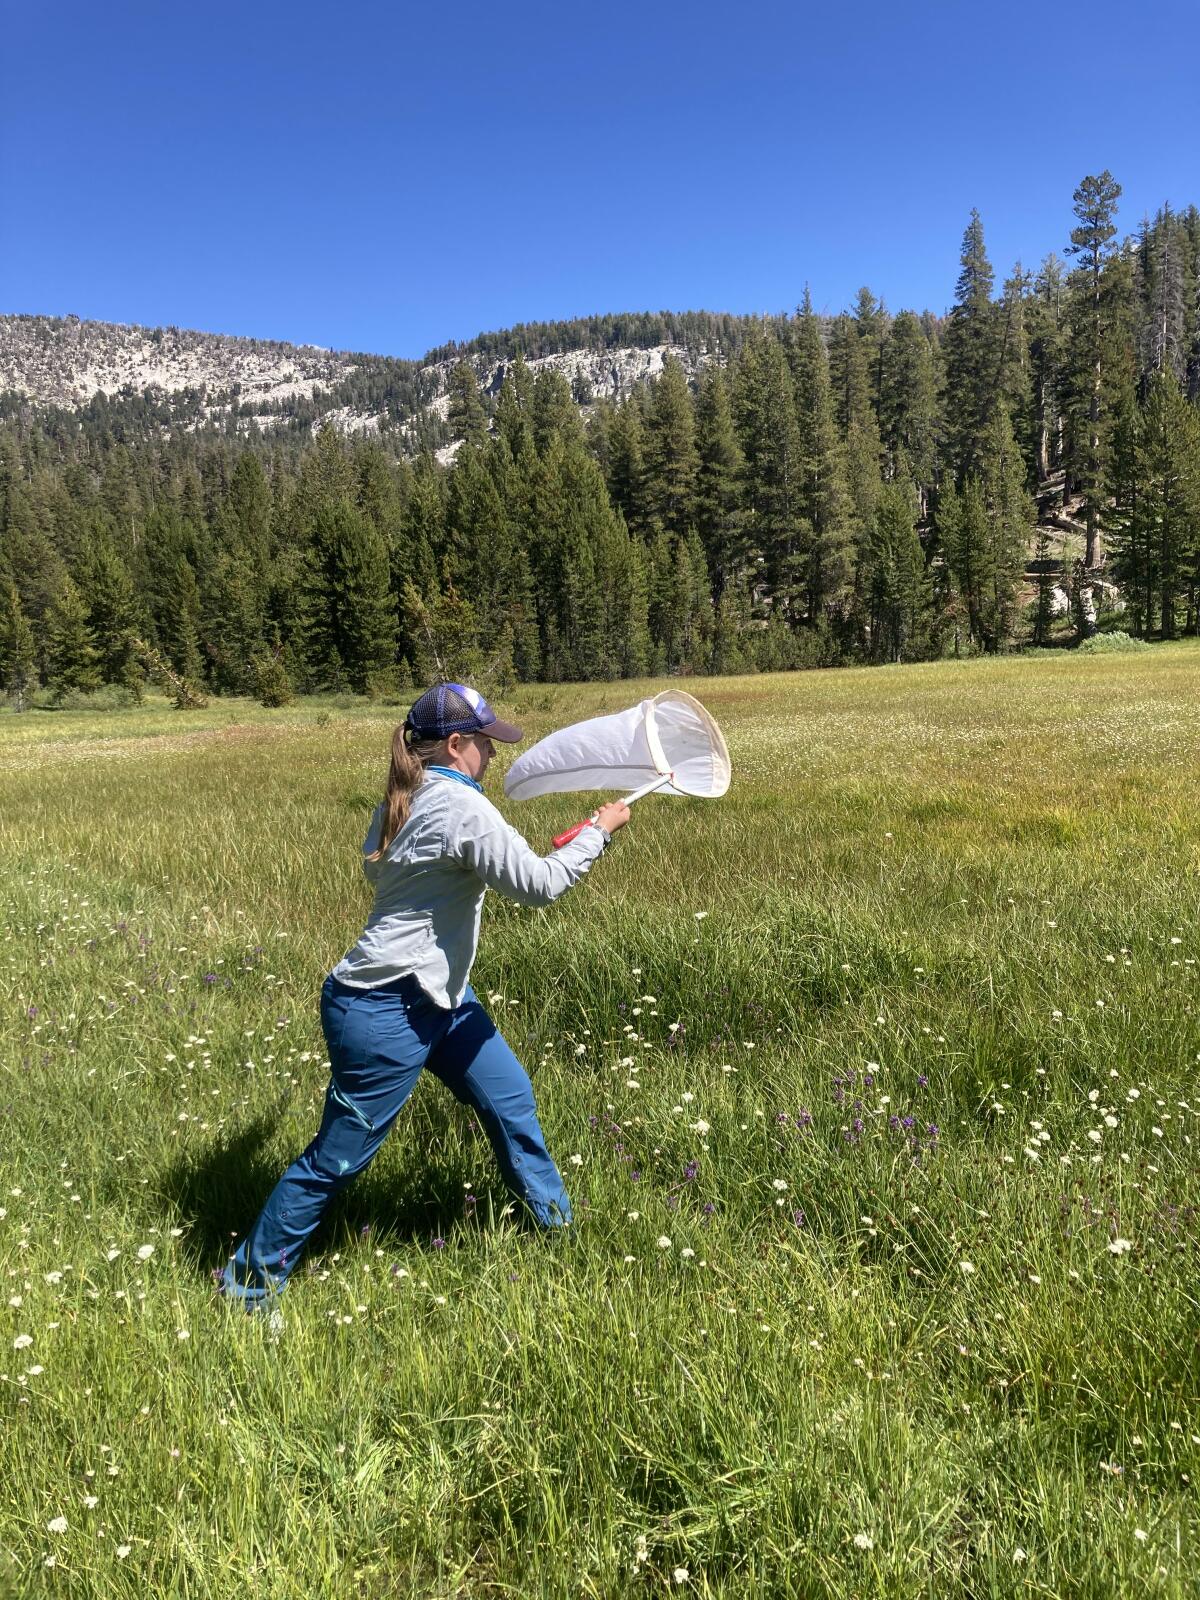 Hammer Lab researcher Kristal Watrous aims to net a bee in the Eastern Sierra Nevada in early September.